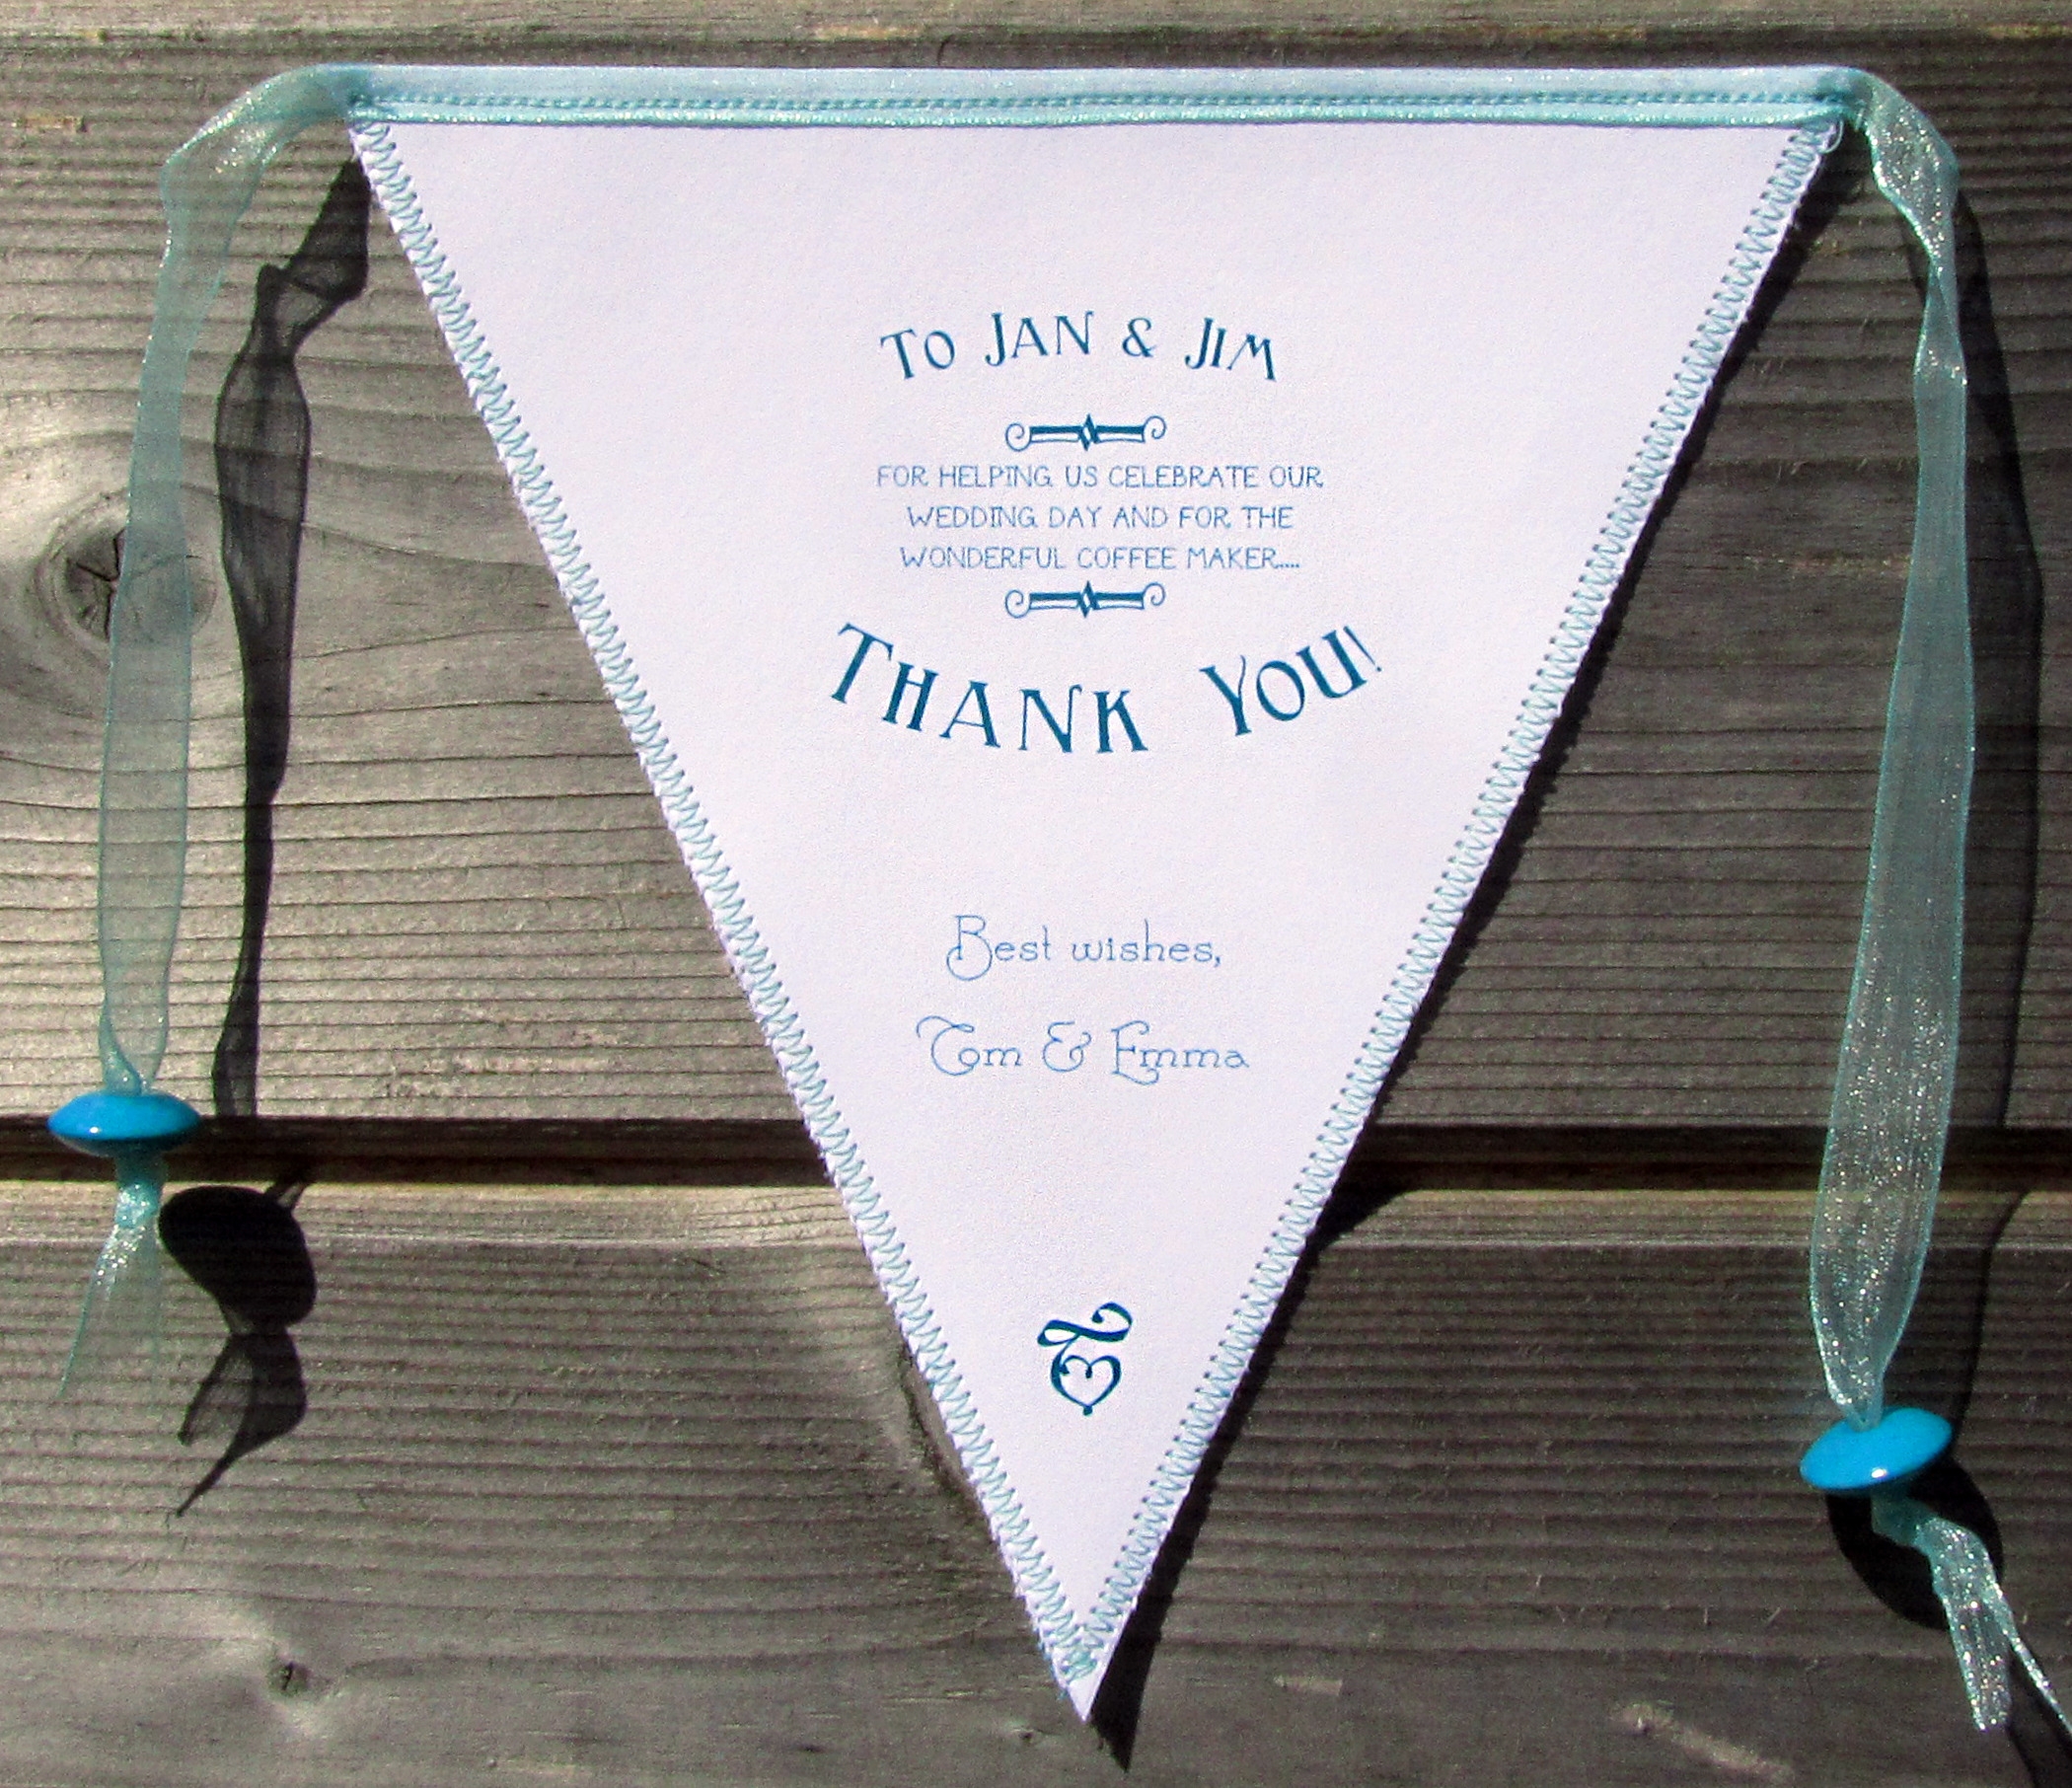 Bunting Best - Bunting Invitations, stationery and decorations